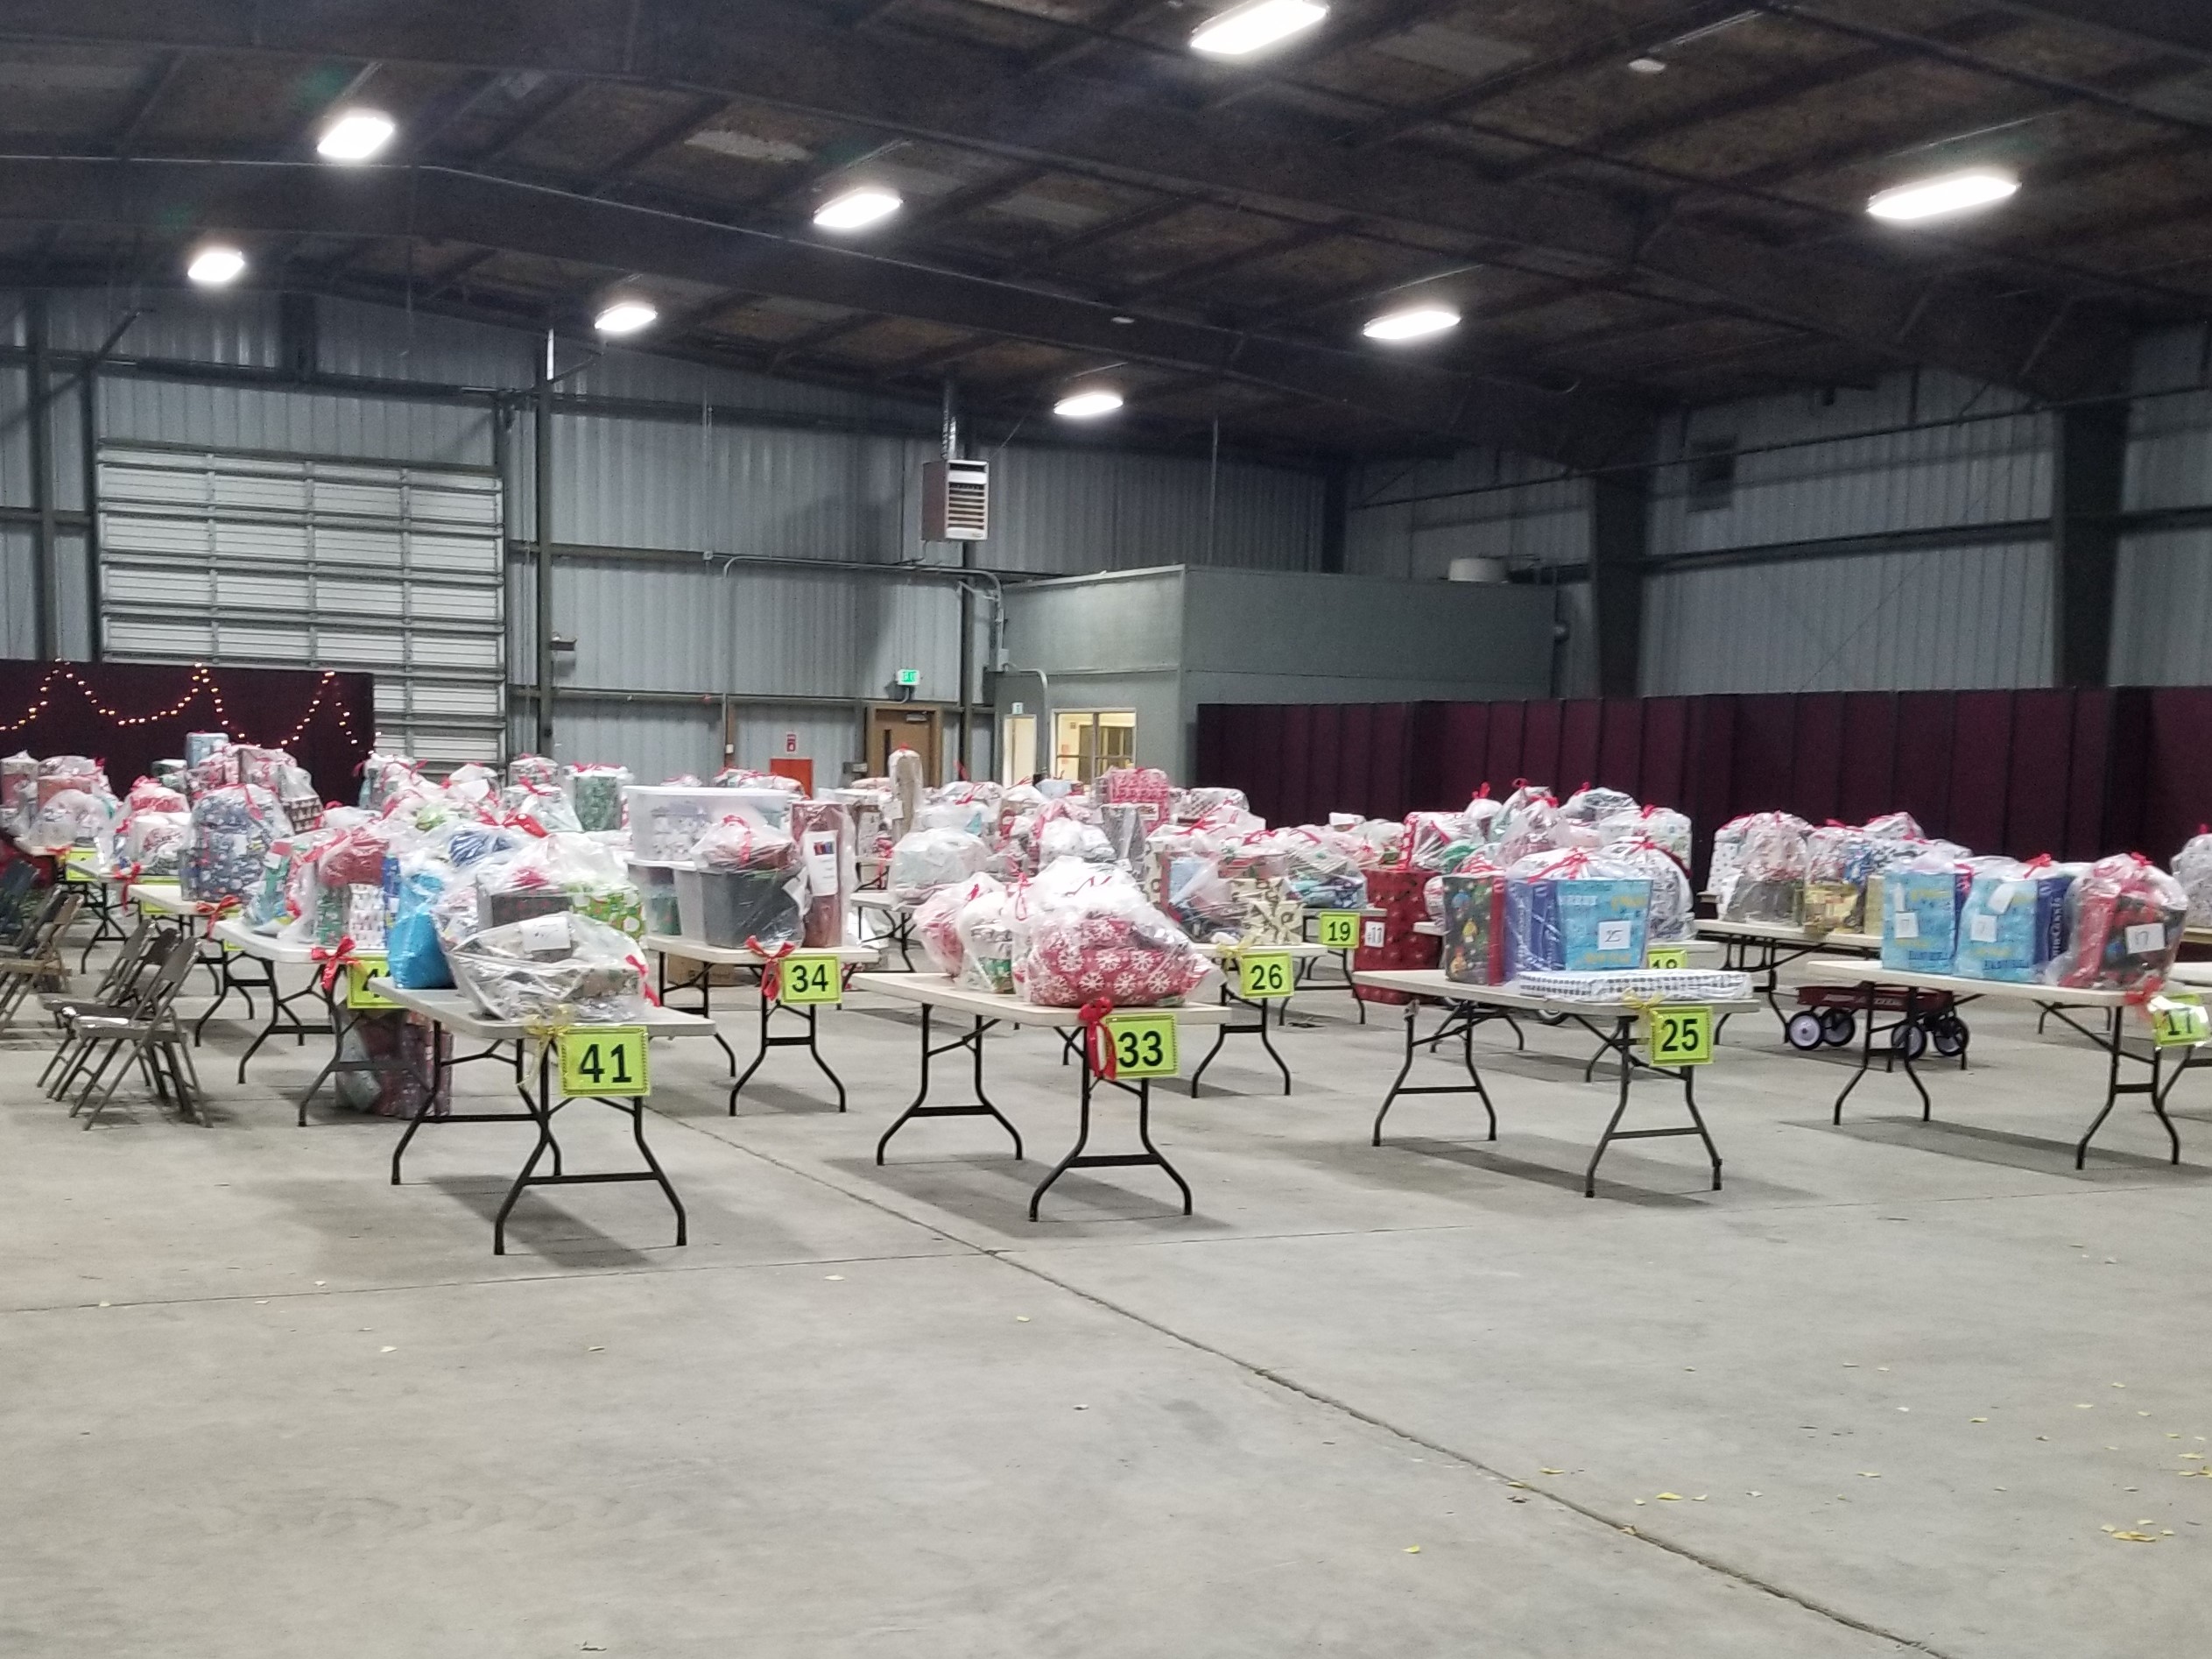 More than a dozen tables are filled with packages of wrapped gifts